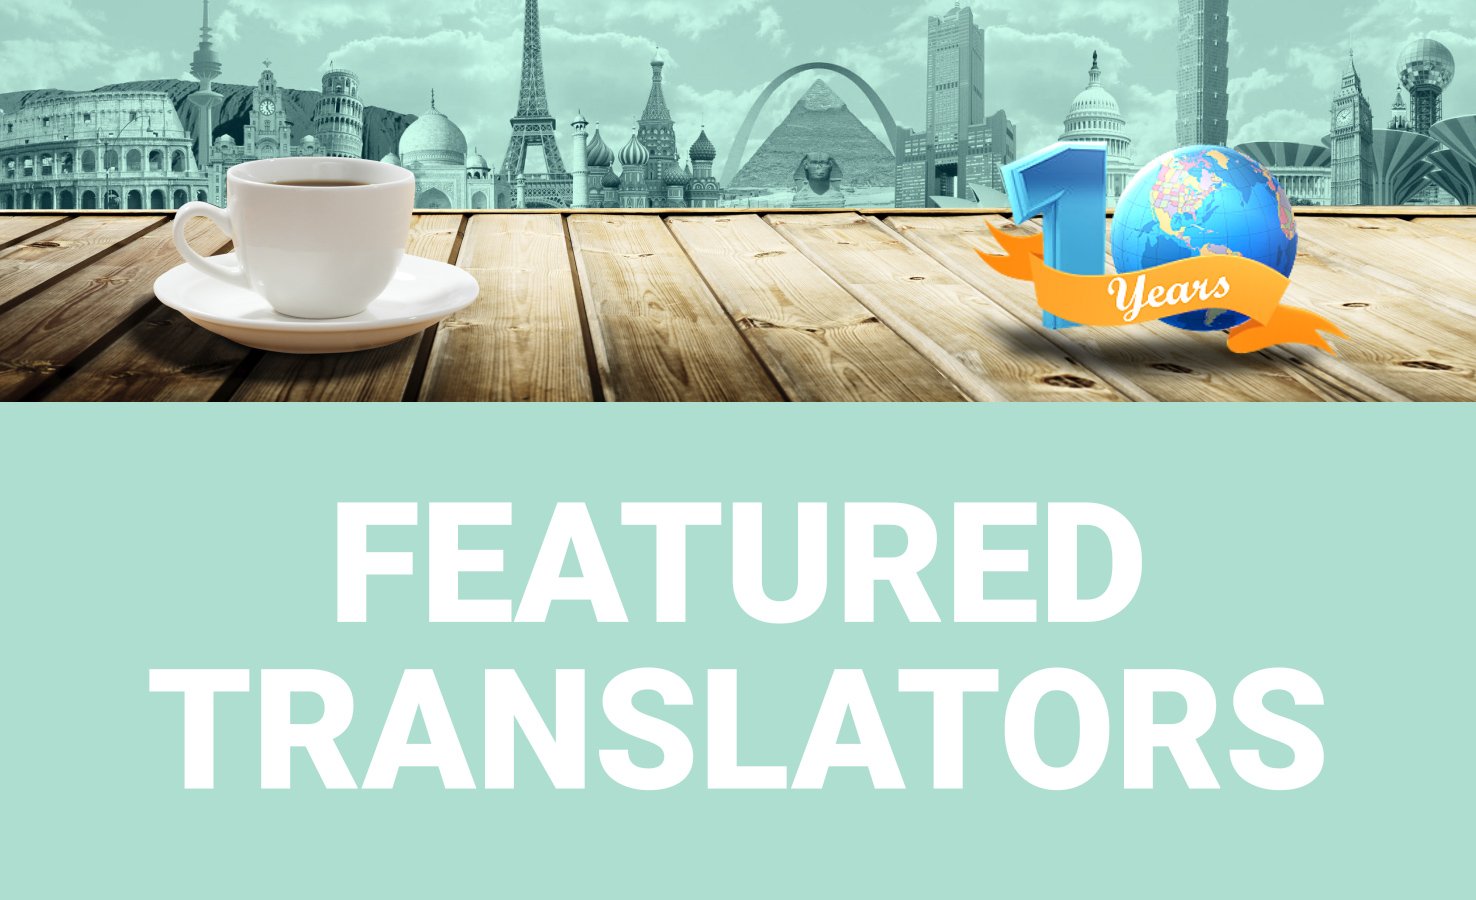 Meet Day Translations Top Translators in Our Anniversary Feature – Part 4